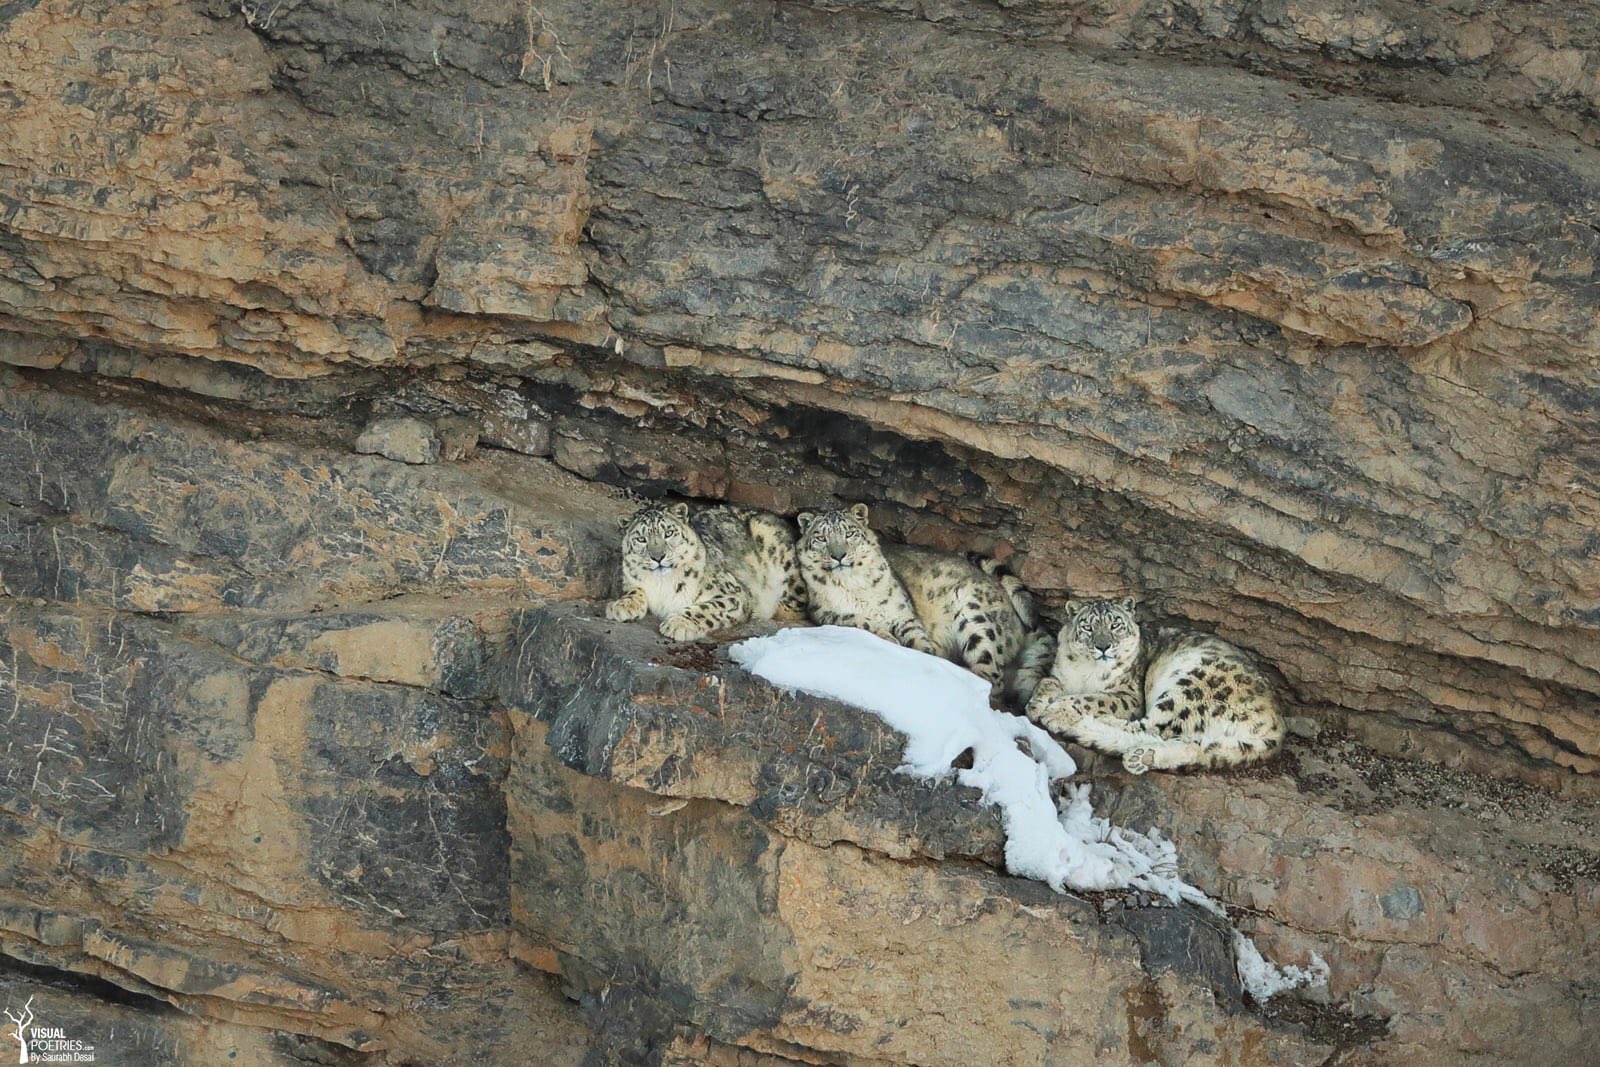 Stunning photograph of three snow leopards on ledge in cliff face